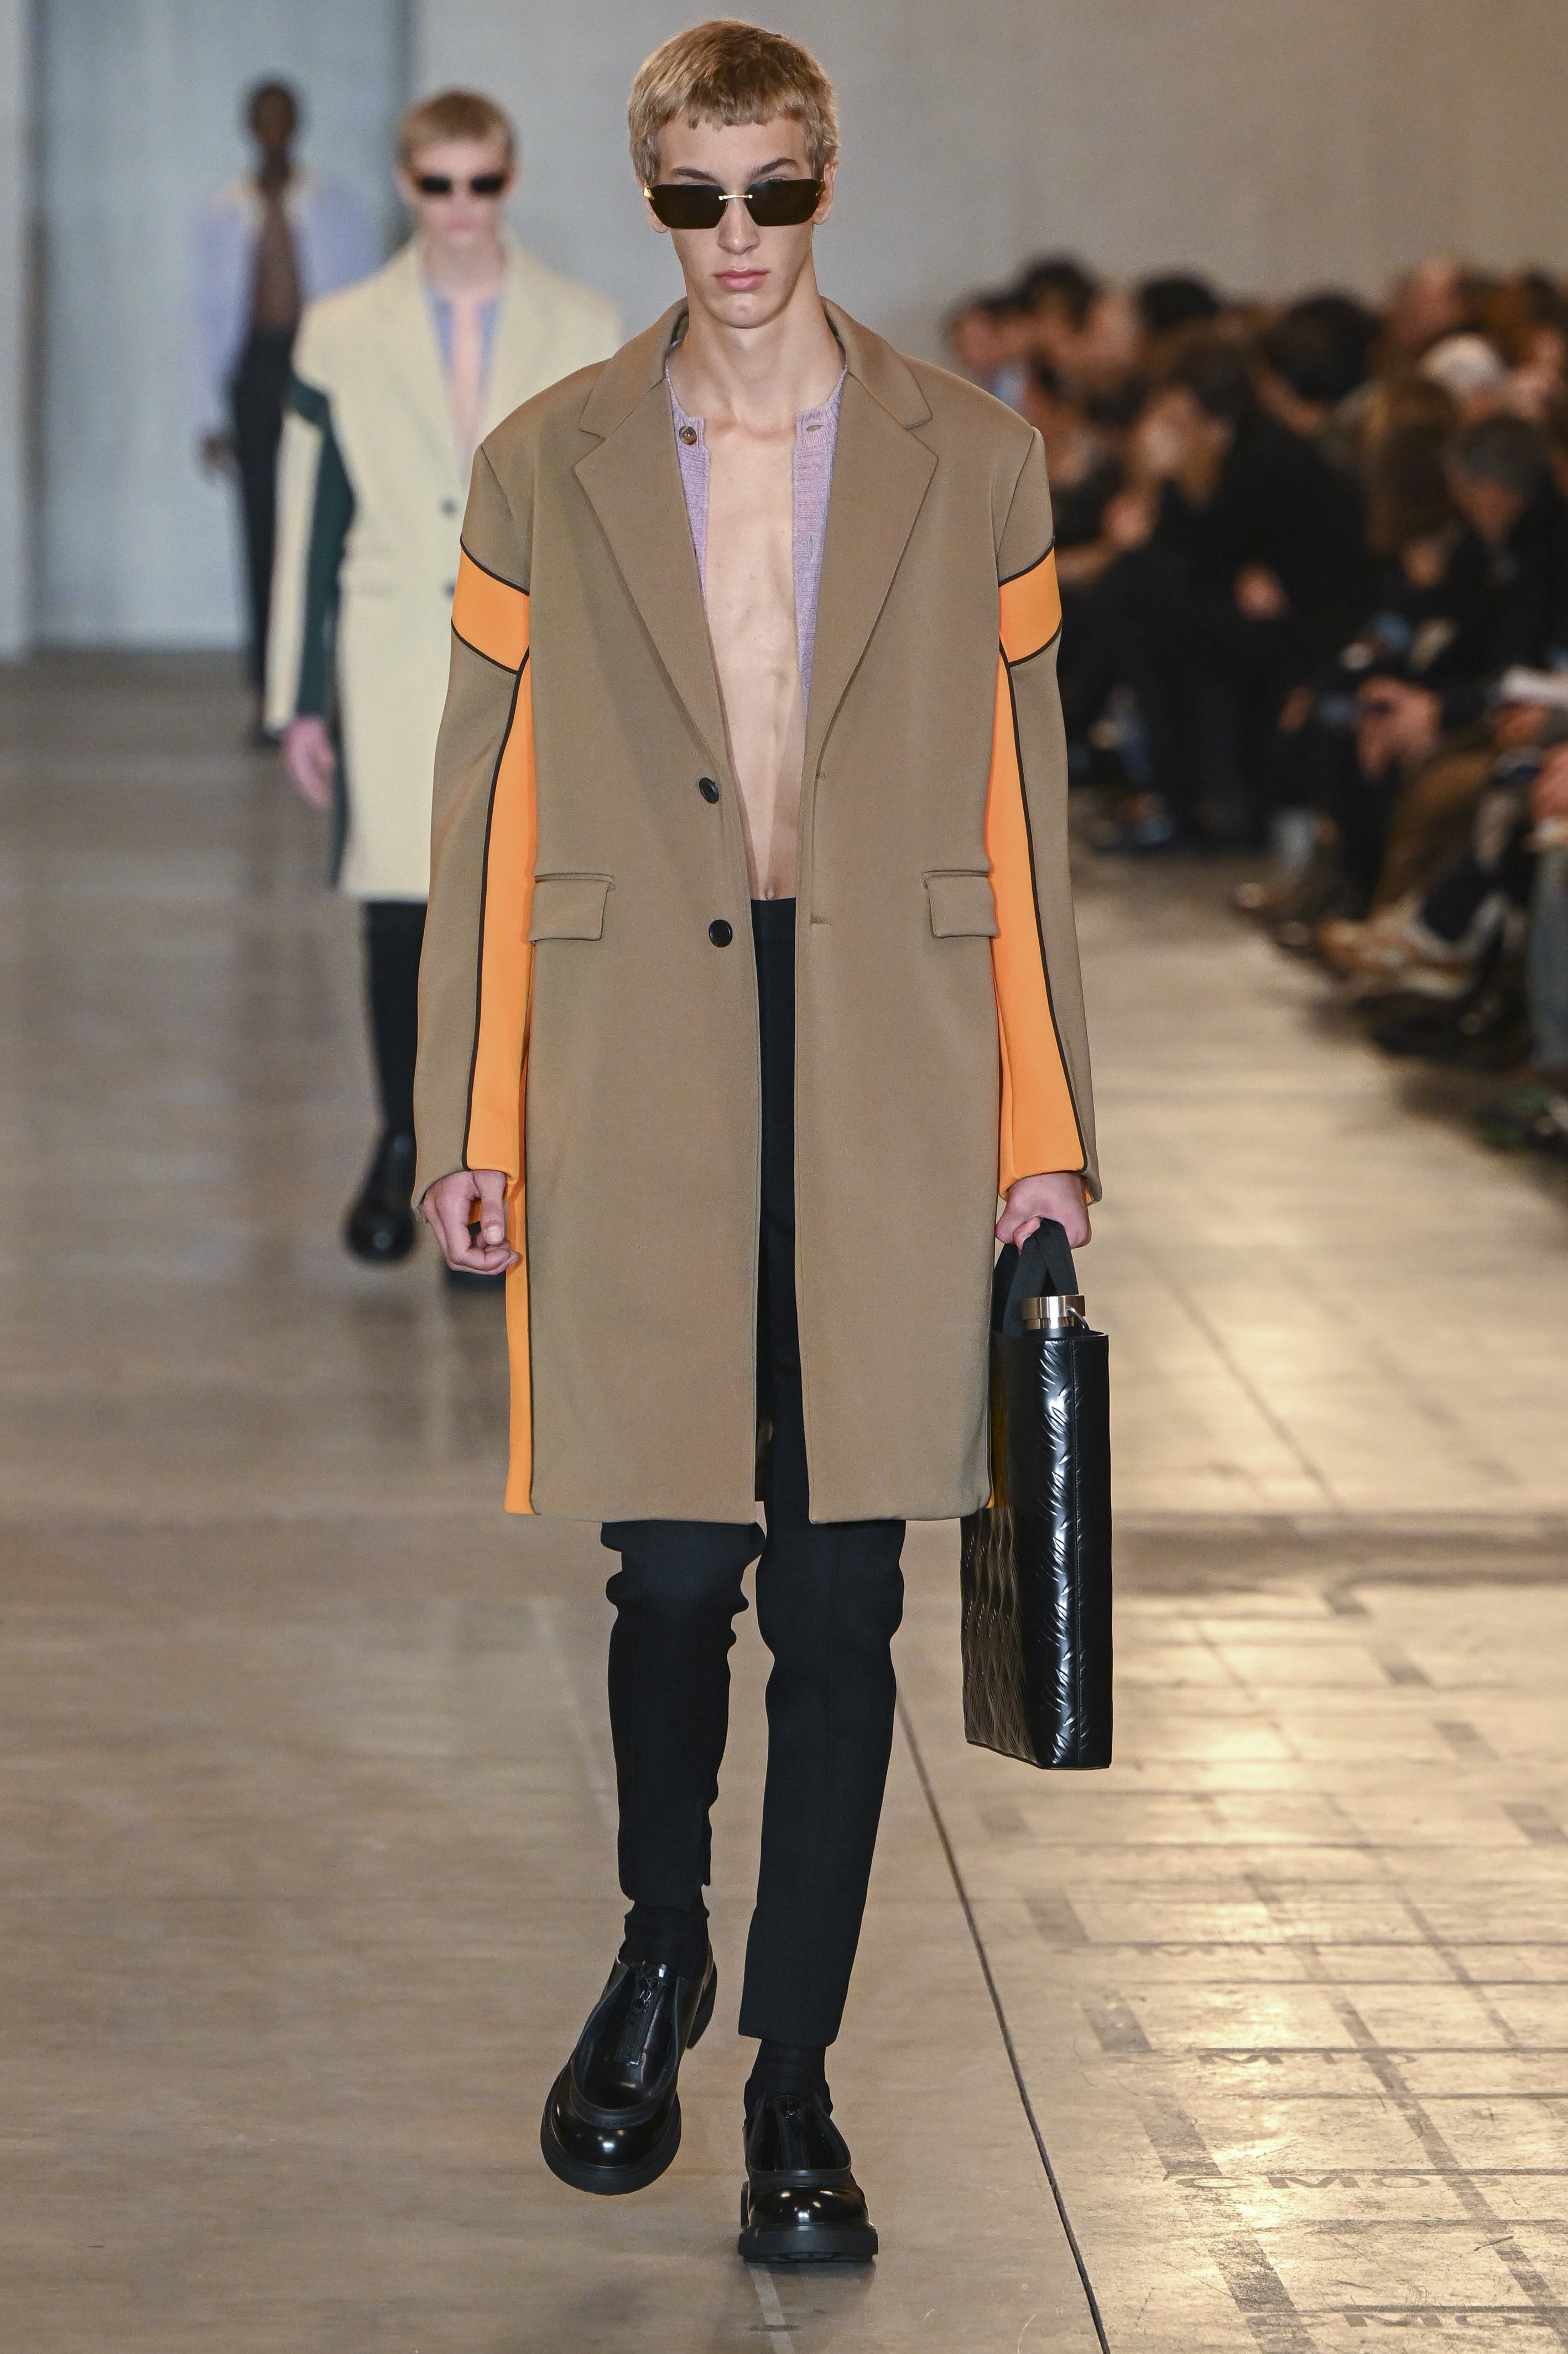 Prada FALL/WINTER 2023 Menswear Show: Let's Talk About Clothes